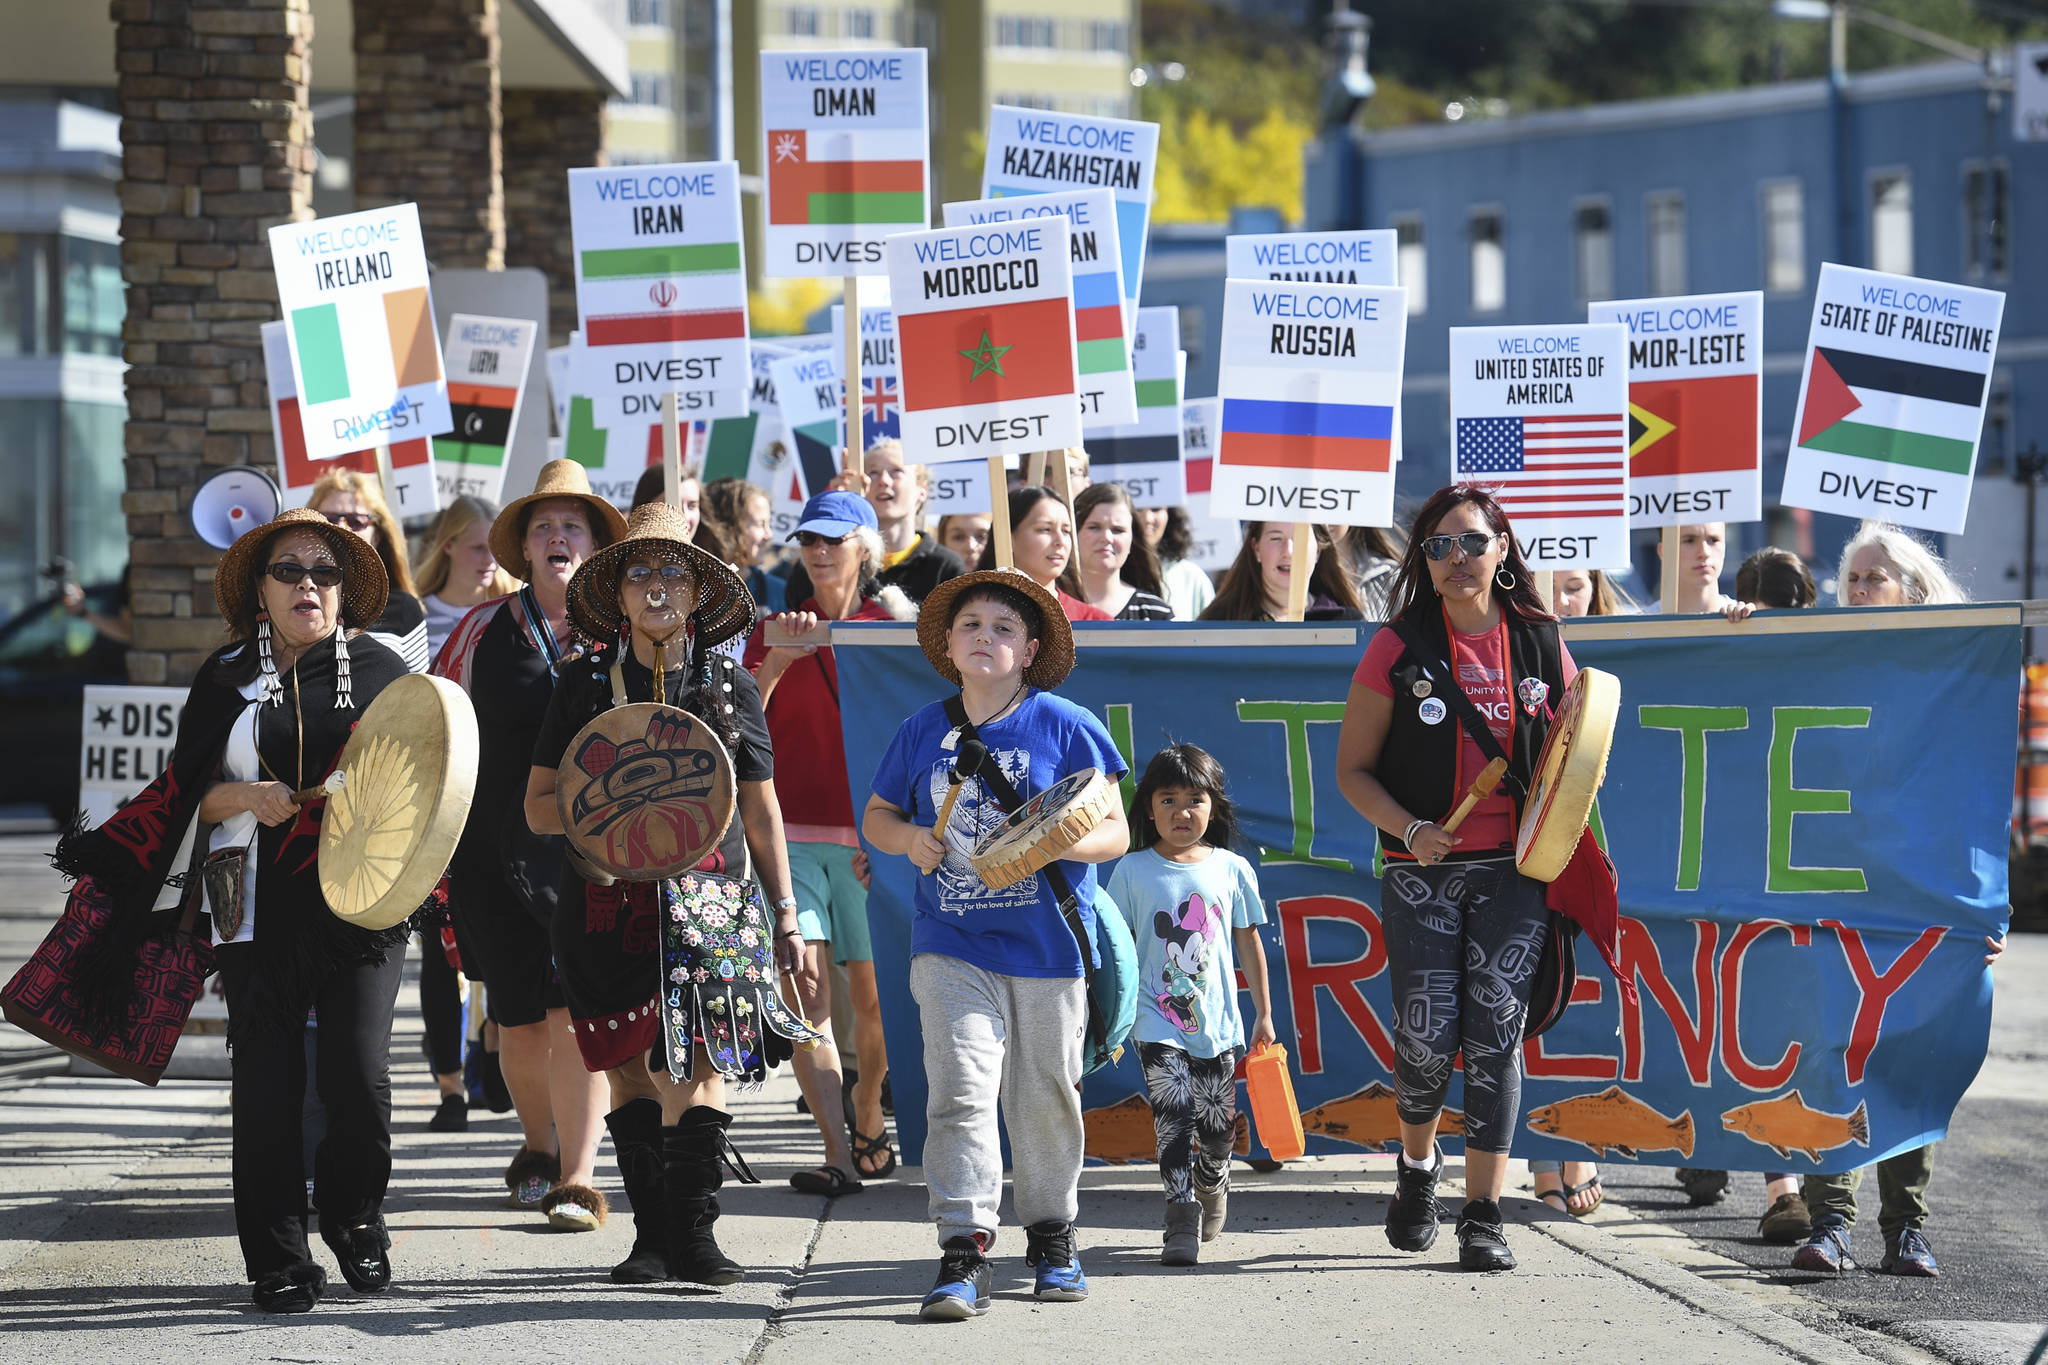 Juneau students and residents, led by members of the Yees Ku Oo Dance Group, march to Centennial Hall during a “Stand Strong for Climate” rally on Tuesday, Sept. 10, 2019. The International Forum of Sovereign Wealth Funds is holding four days of meetings at Centennial Hall. The rally was organized by 350 Juneau, a local chapter of an international climate advocacy movement, 350.org. (Michael Penn | Juneau Empire)